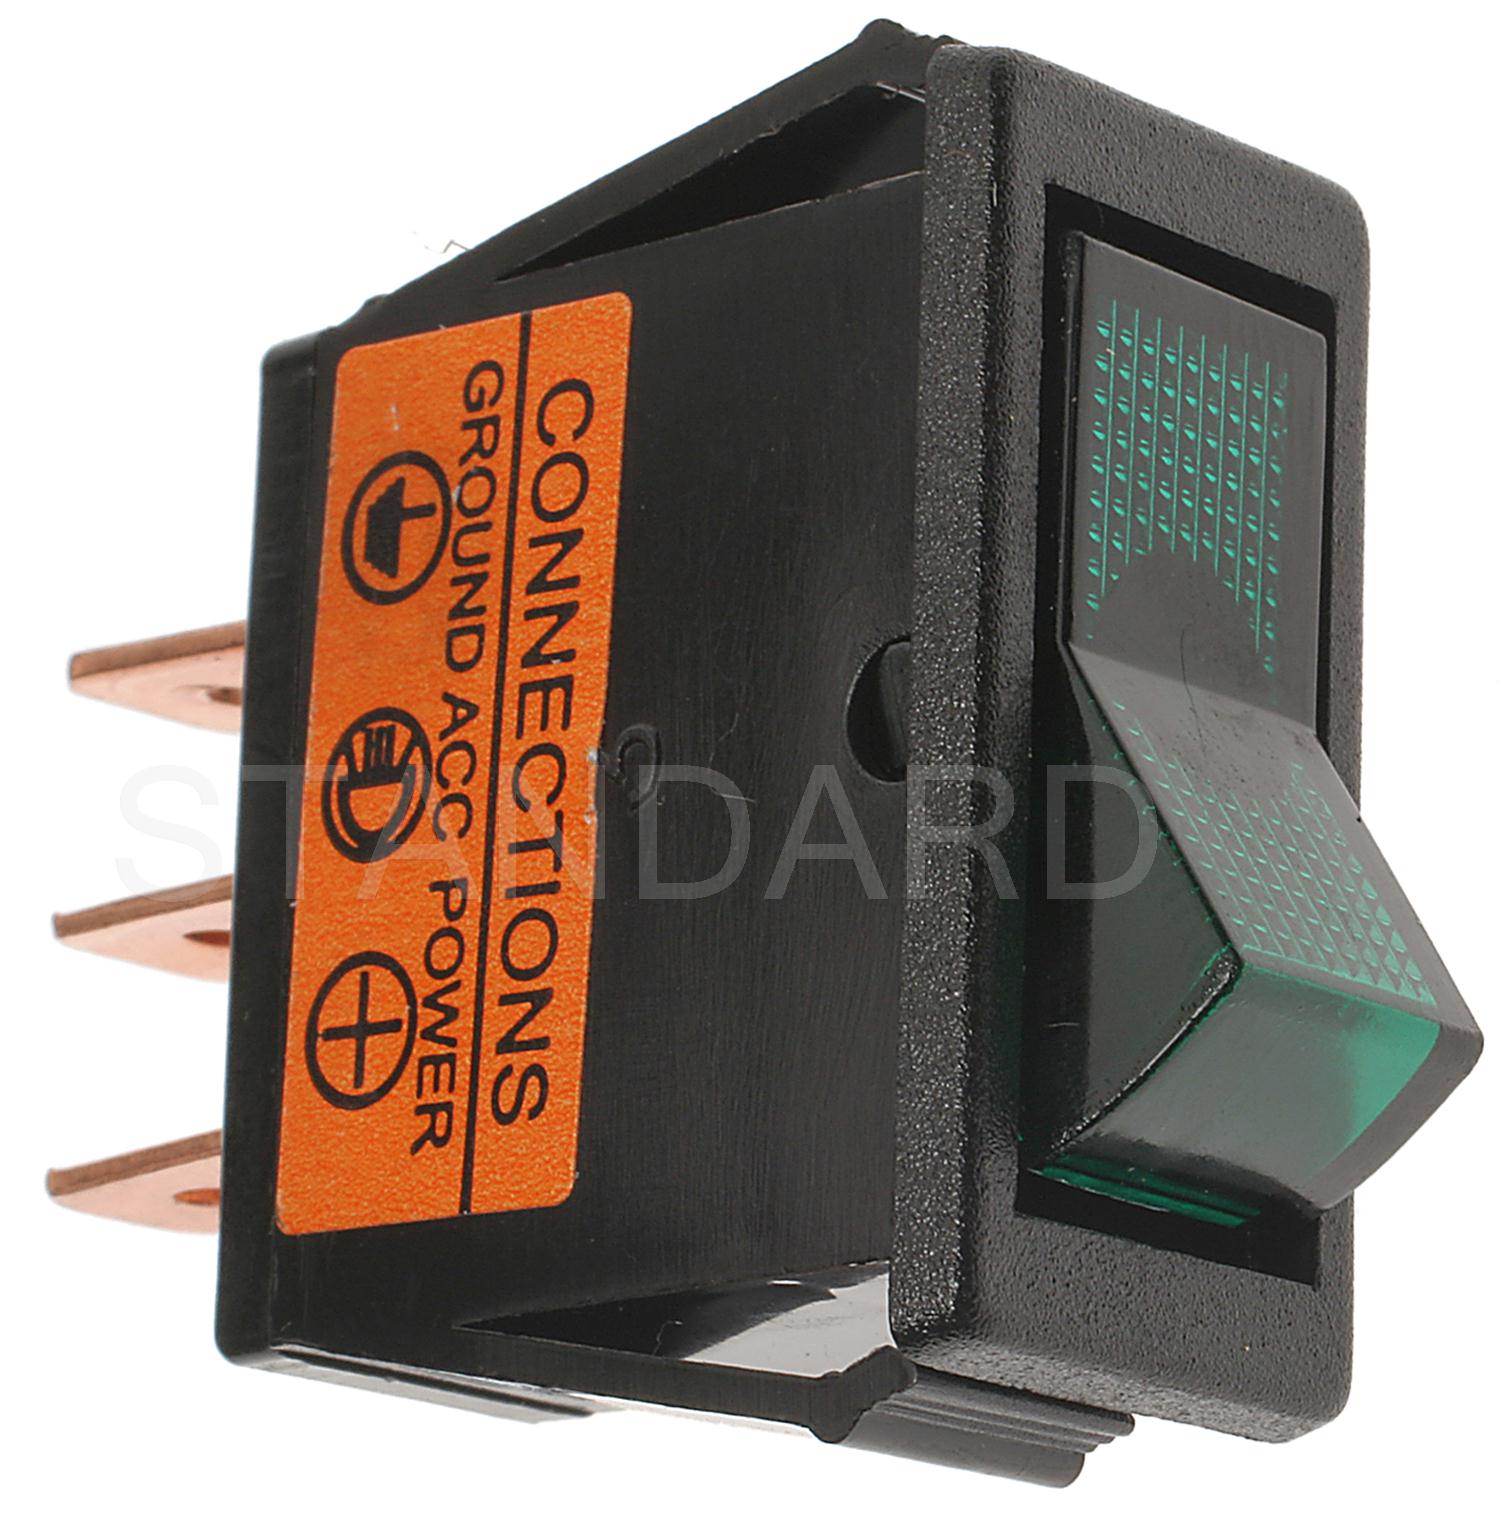 Show details for Standard Motor Products DS320 Multi Purpose Switch